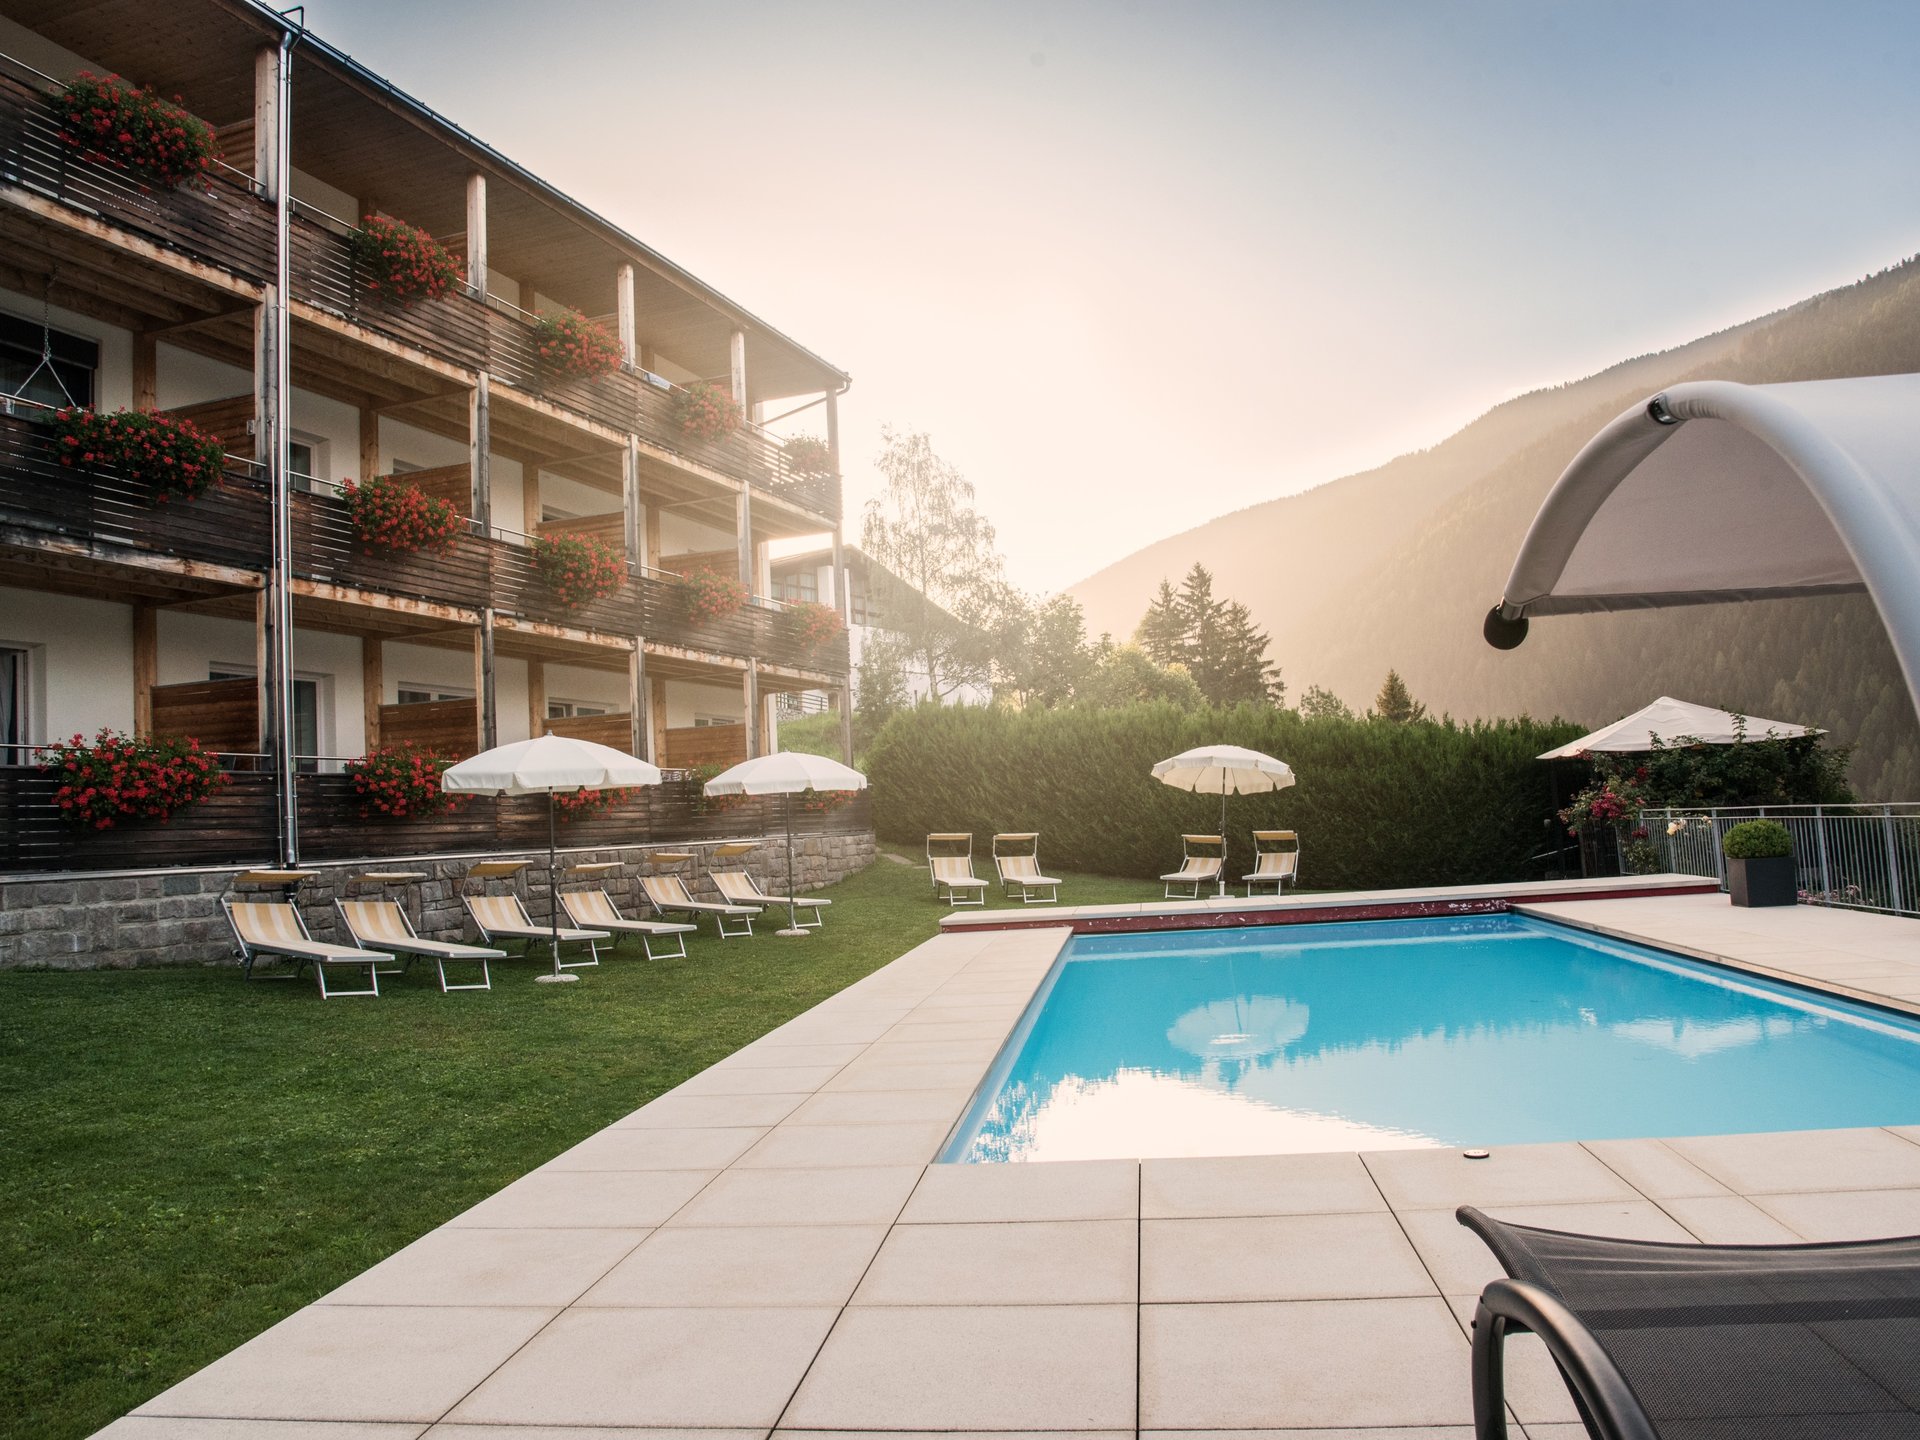 Central, quietly and sunny Hotel in Ultental Valley (South Tyrol) with sun terrace, garden, pool, wellness and a beautiful view on the mountains.